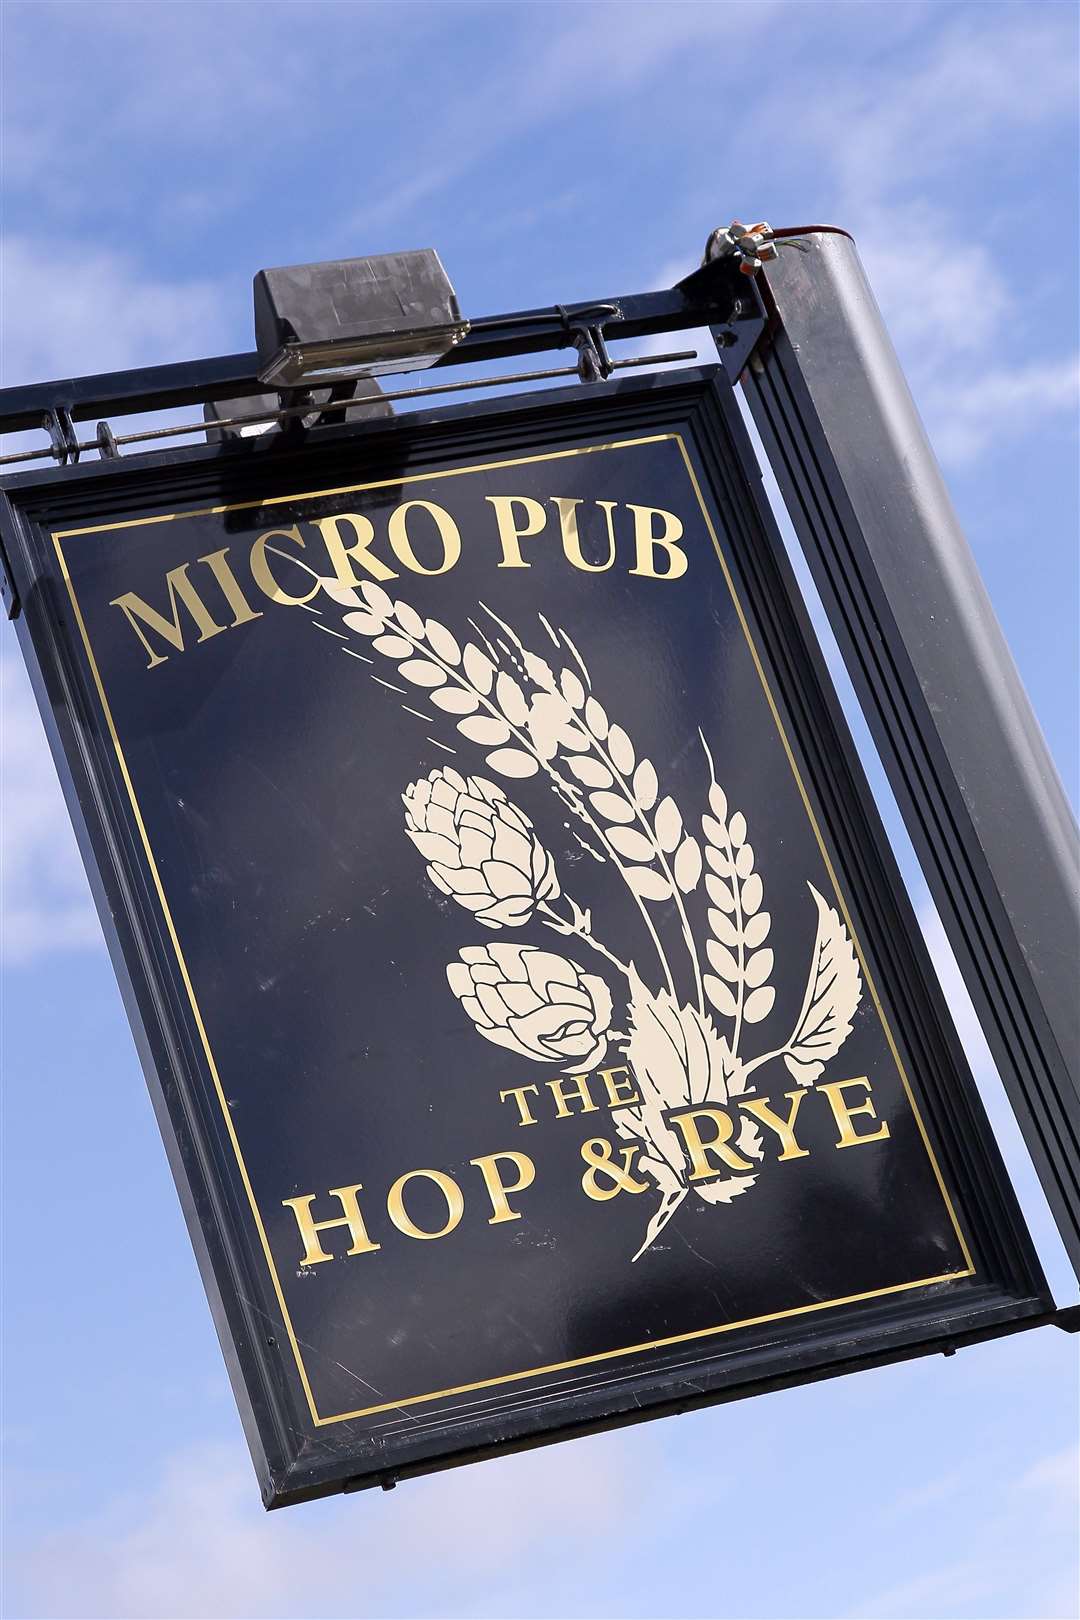 The previous owners of the pub lost their licence after they were caught breaking social distancing rules